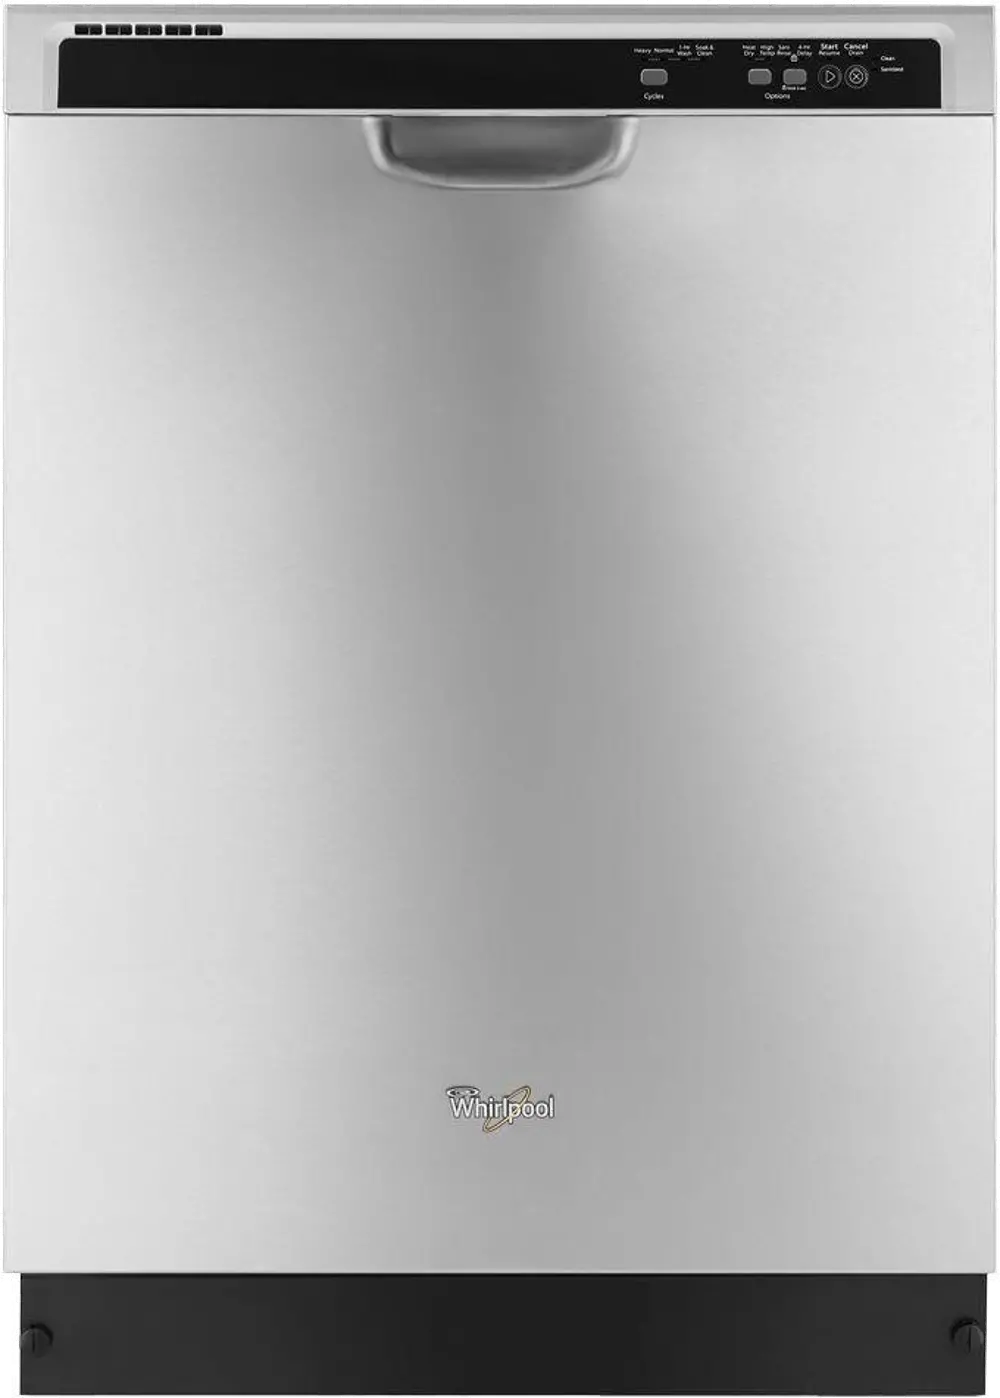 WDF520PADM Whirlpool Front Control Dishwasher - Stainless Steel-1